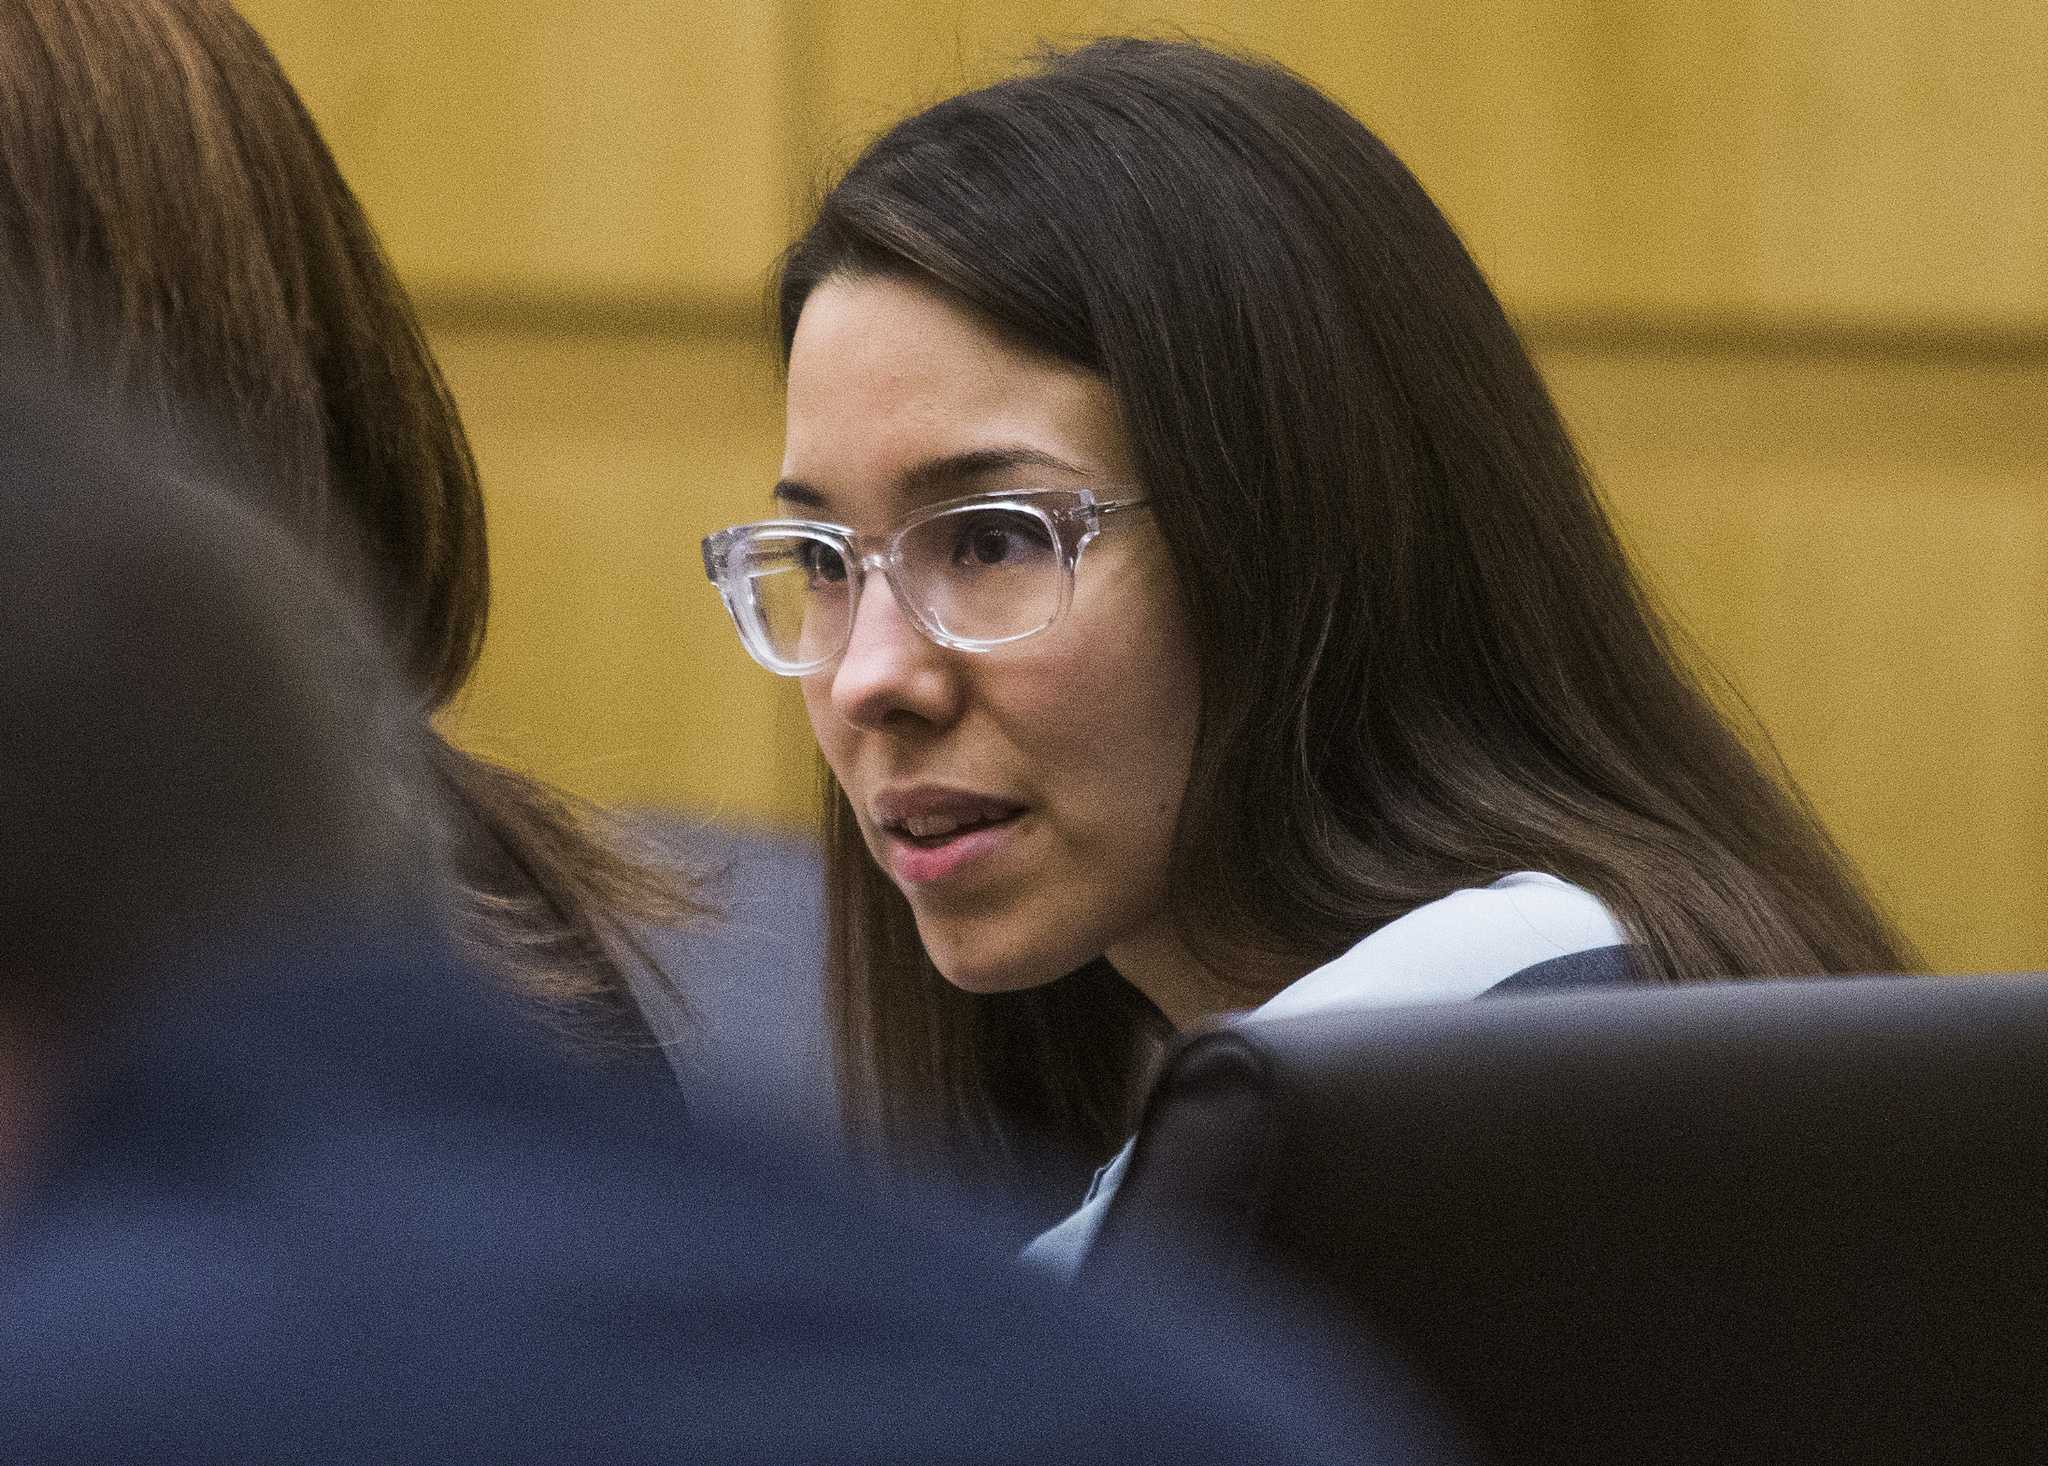 Only question about Jodi Arias is whether she'll live or die